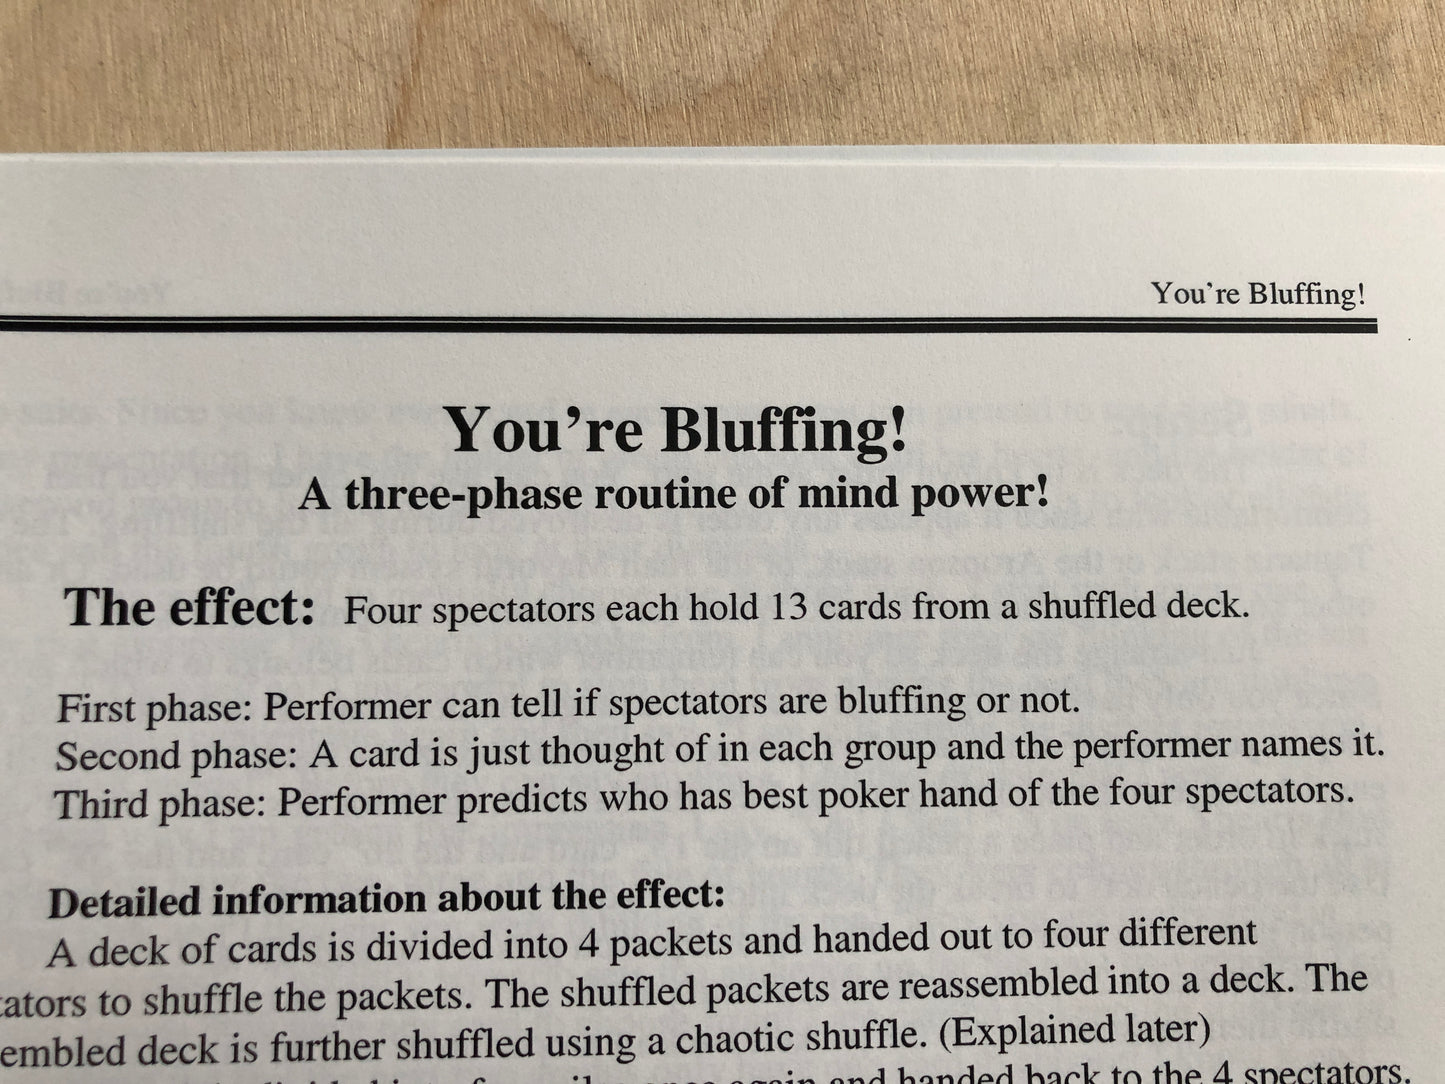 You're Bluffing! - Mind Power Demonstration - John Rogers